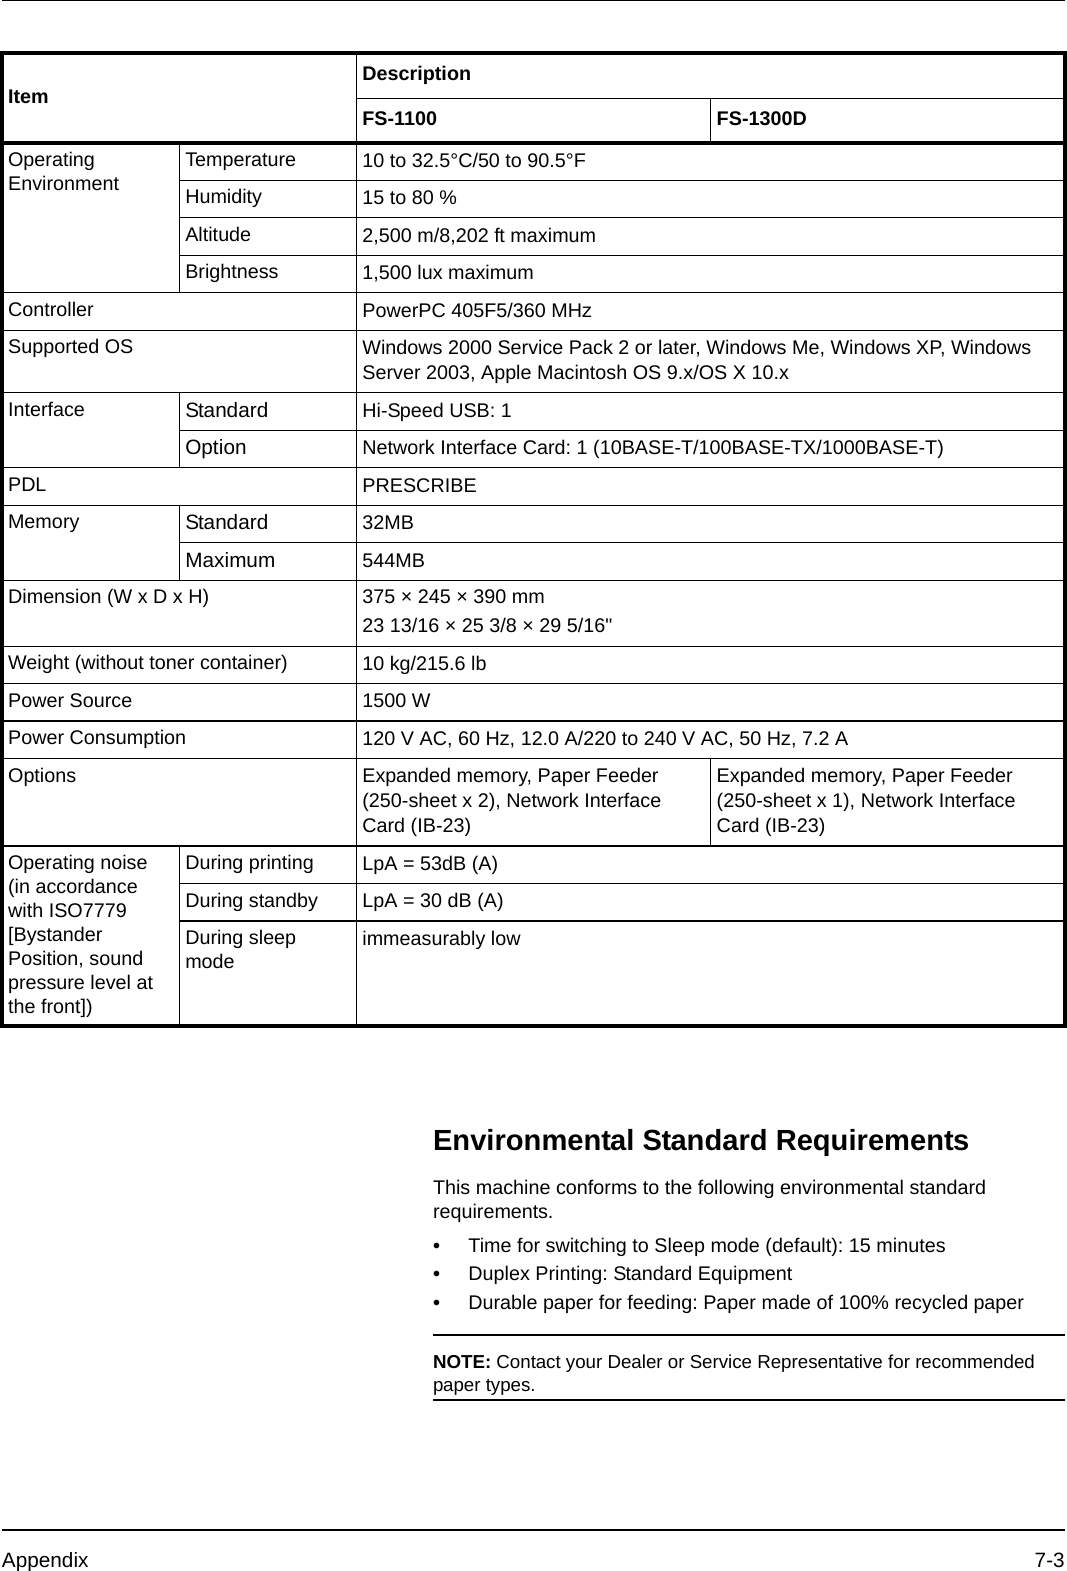 Appendix 7-3Environmental Standard RequirementsThis machine conforms to the following environmental standard requirements.•Time for switching to Sleep mode (default): 15 minutes•Duplex Printing: Standard Equipment•Durable paper for feeding: Paper made of 100% recycled paper NOTE: Contact your Dealer or Service Representative for recommended paper types.Operating EnvironmentTemperature 10 to 32.5°C/50 to 90.5°FHumidity 15 to 80 %Altitude 2,500 m/8,202 ft maximumBrightness 1,500 lux maximumController PowerPC 405F5/360 MHzSupported OS Windows 2000 Service Pack 2 or later, Windows Me, Windows XP, Windows  Server 2003, Apple Macintosh OS 9.x/OS X 10.xInterface Standard Hi-Speed USB: 1Option Network Interface Card: 1 (10BASE-T/100BASE-TX/1000BASE-T)PDL PRESCRIBEMemory Standard 32MBMaximum 544MBDimension (W x D x H) 375 × 245 × 390 mm23 13/16 × 25 3/8 × 29 5/16&quot;Weight (without toner container) 10 kg/215.6 lbPower Source 1500 WPower Consumption 120 V AC, 60 Hz, 12.0 A/220 to 240 V AC, 50 Hz, 7.2 AOptions Expanded memory, Paper Feeder (250-sheet x 2), Network Interface Card (IB-23)Expanded memory, Paper Feeder (250-sheet x 1), Network Interface Card (IB-23)Operating noise (in accordance with ISO7779 [Bystander Position, sound pressure level at the front])During printing LpA = 53dB (A)During standby LpA = 30 dB (A)During sleep mode immeasurably lowItem DescriptionFS-1100 FS-1300D